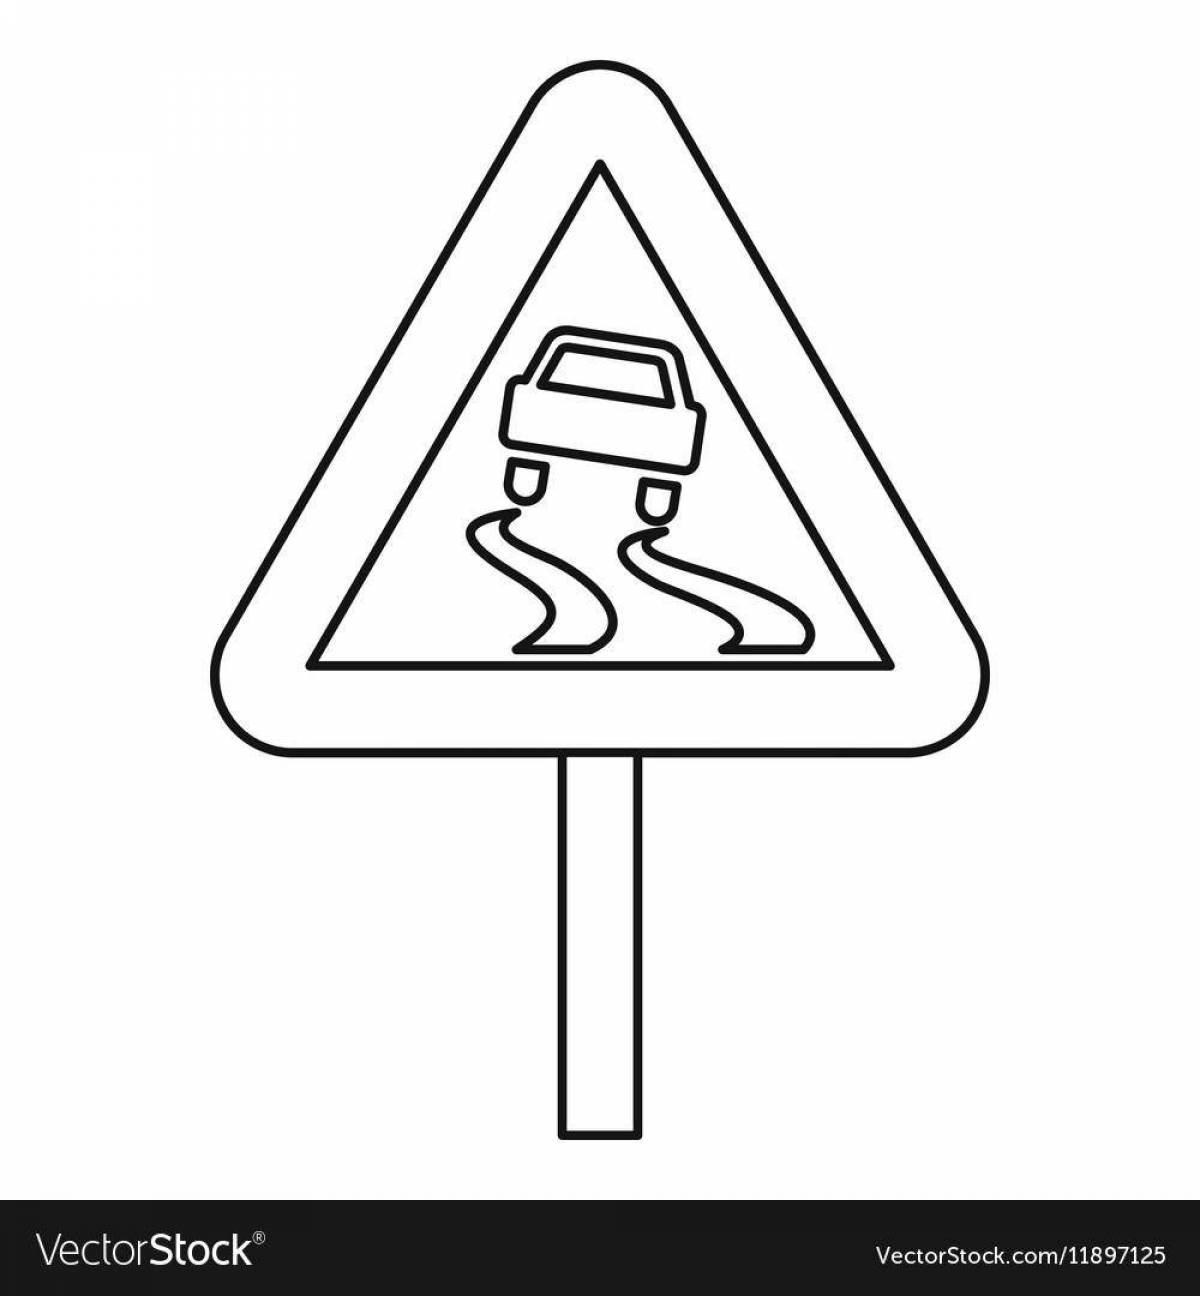 Exciting main road sign coloring page